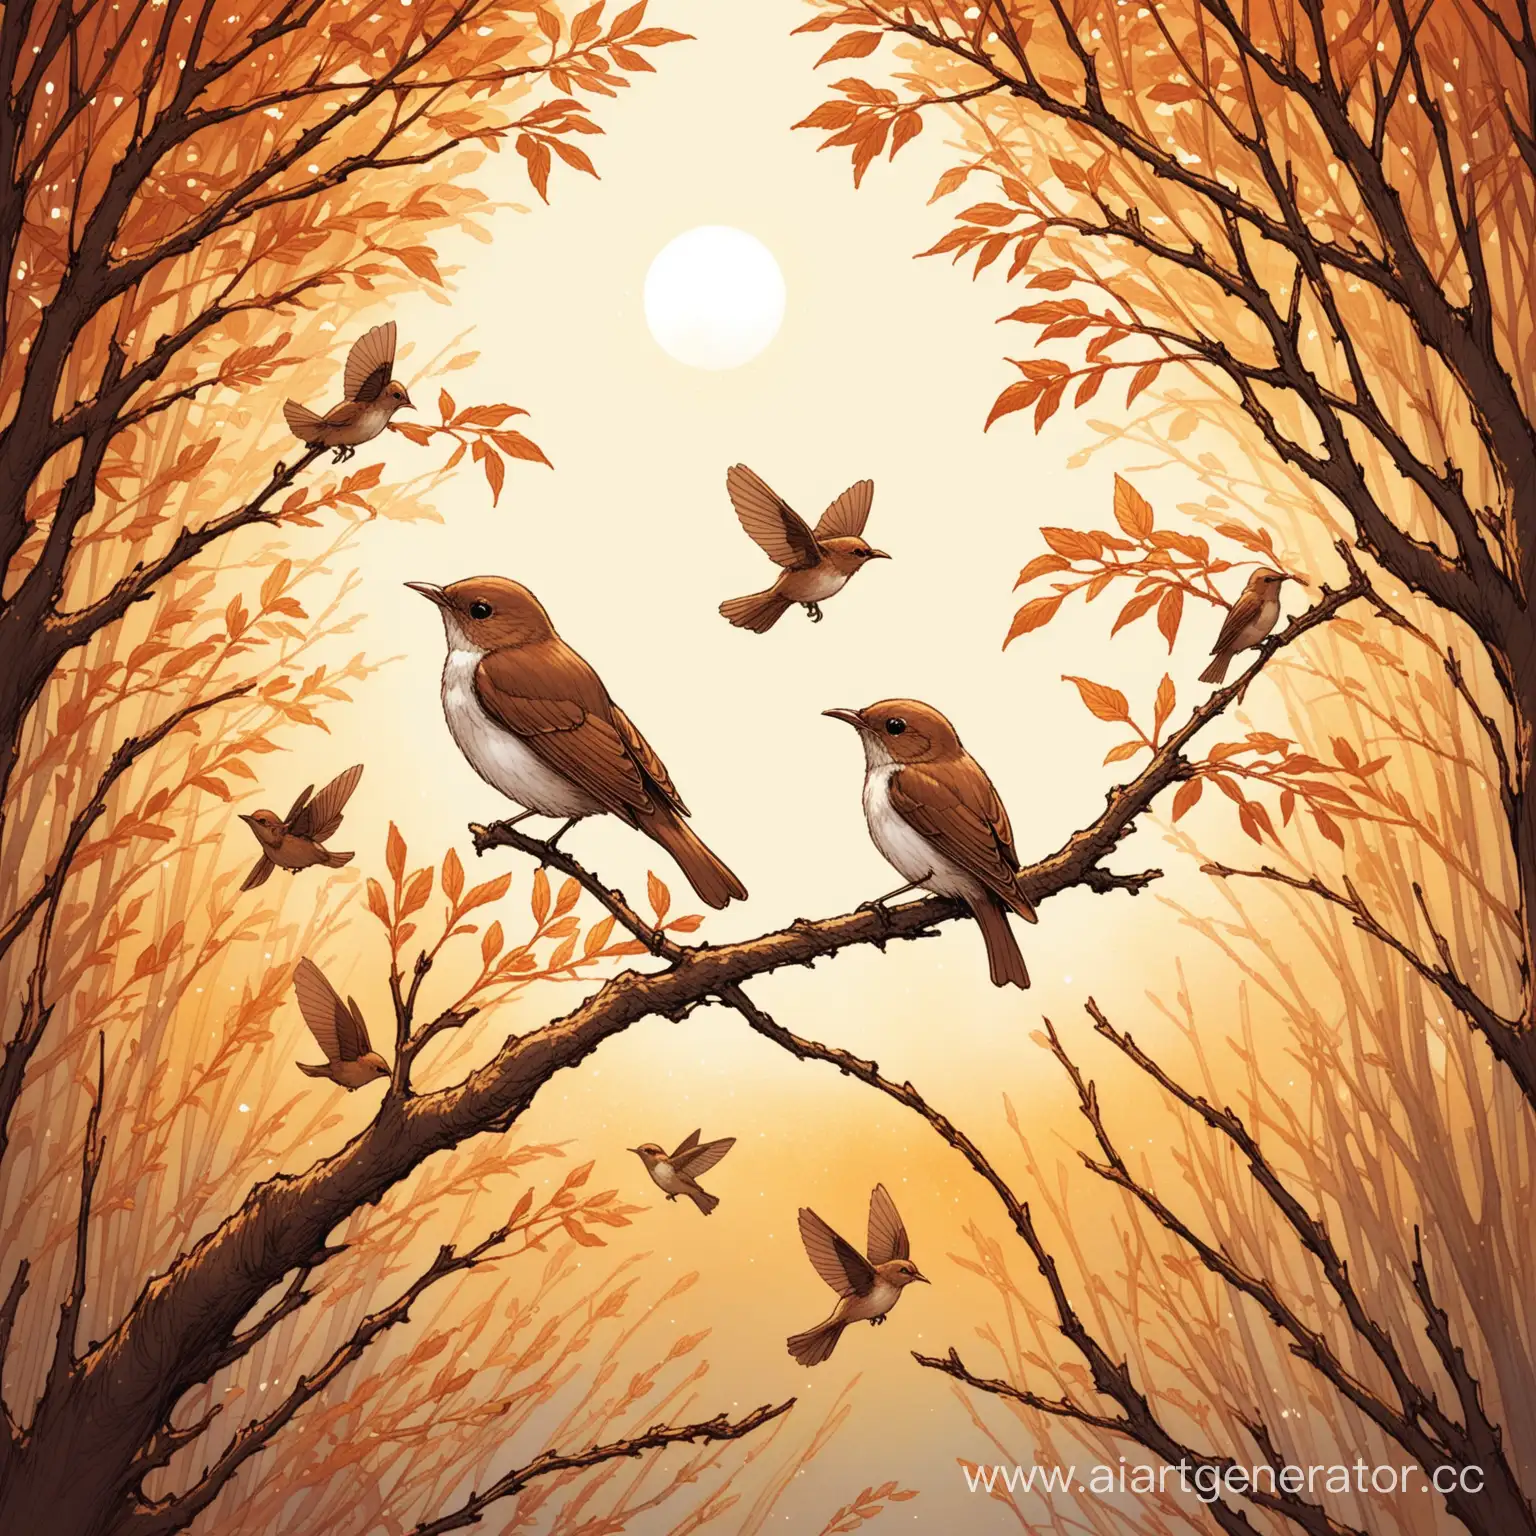 Nightingales-Perched-on-Rustic-Branches-in-Moonlit-Serenity